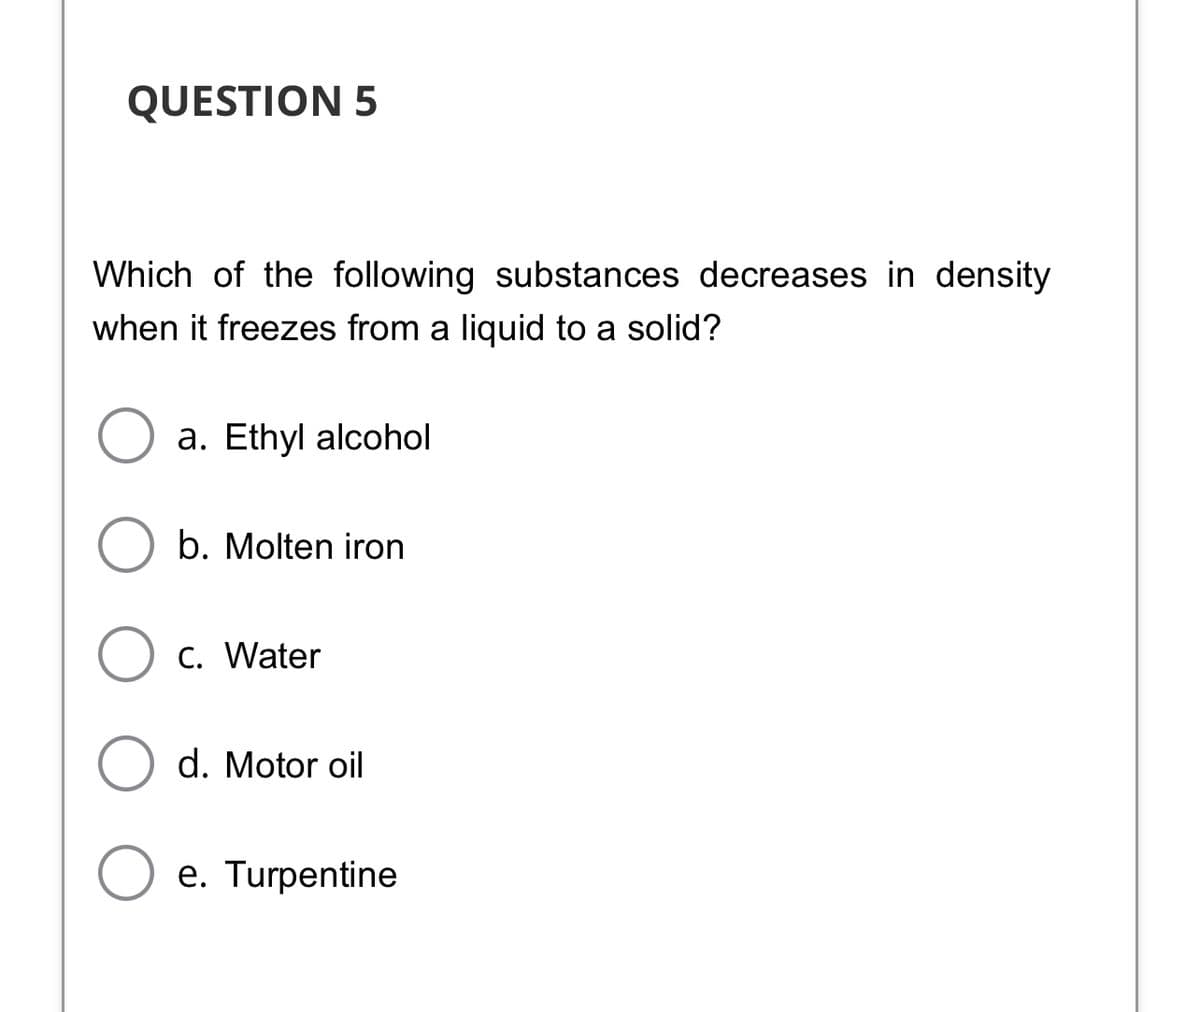 QUESTION 5
Which of the following substances decreases in density
when it freezes from a liquid to a solid?
a. Ethyl alcohol
b. Molten iron
C. Water
d. Motor oil
e. Turpentine
